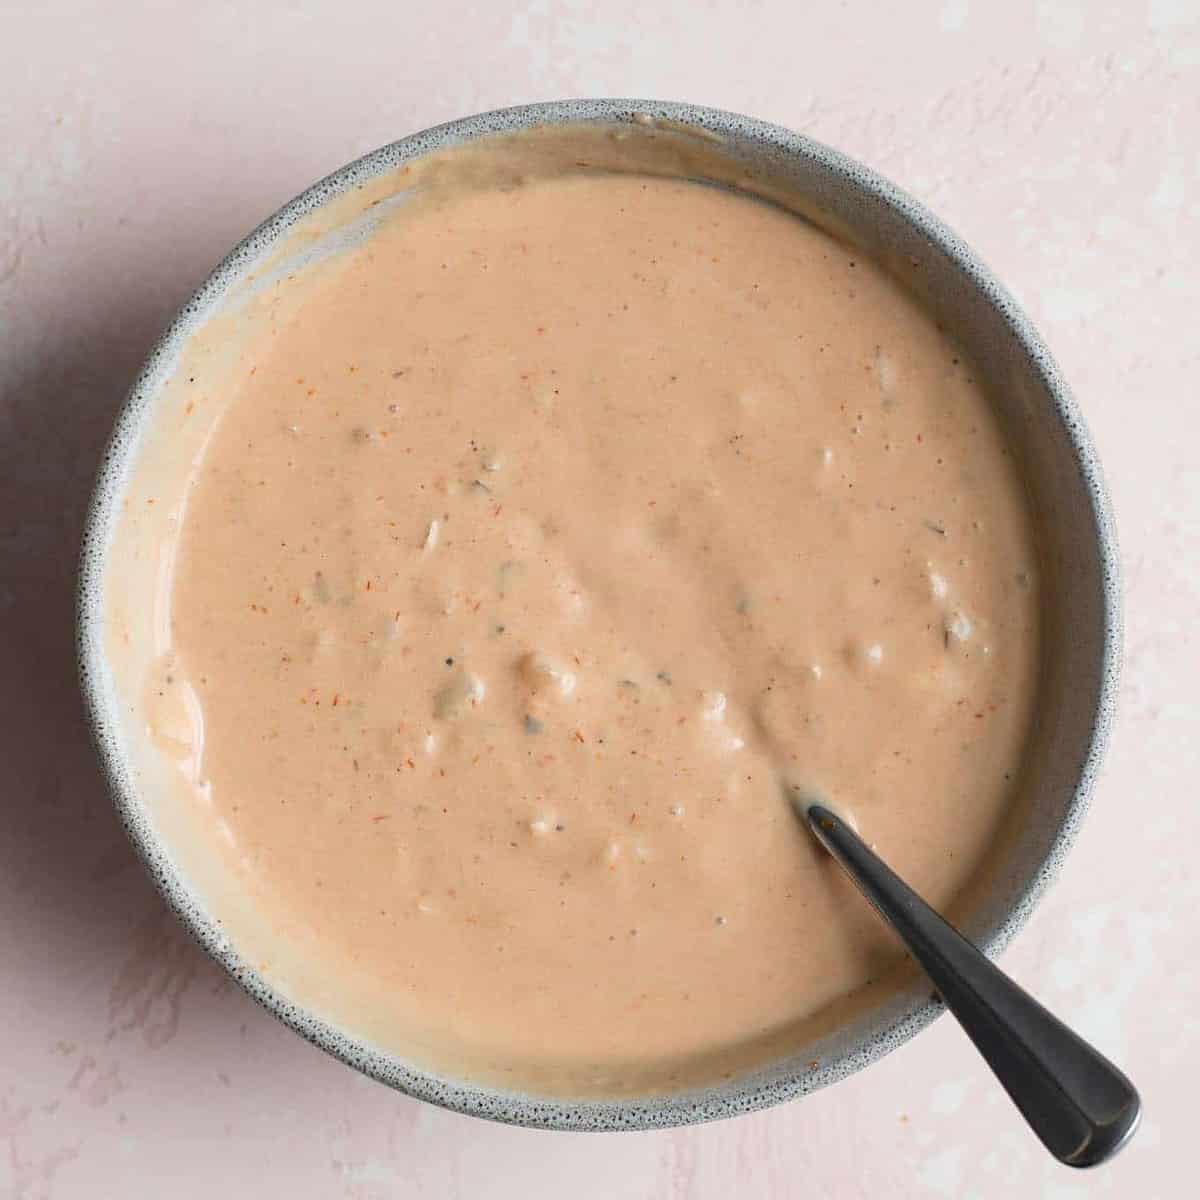  Looking for a delicious plant-based dressing? Look no further than this vegan thousand island.